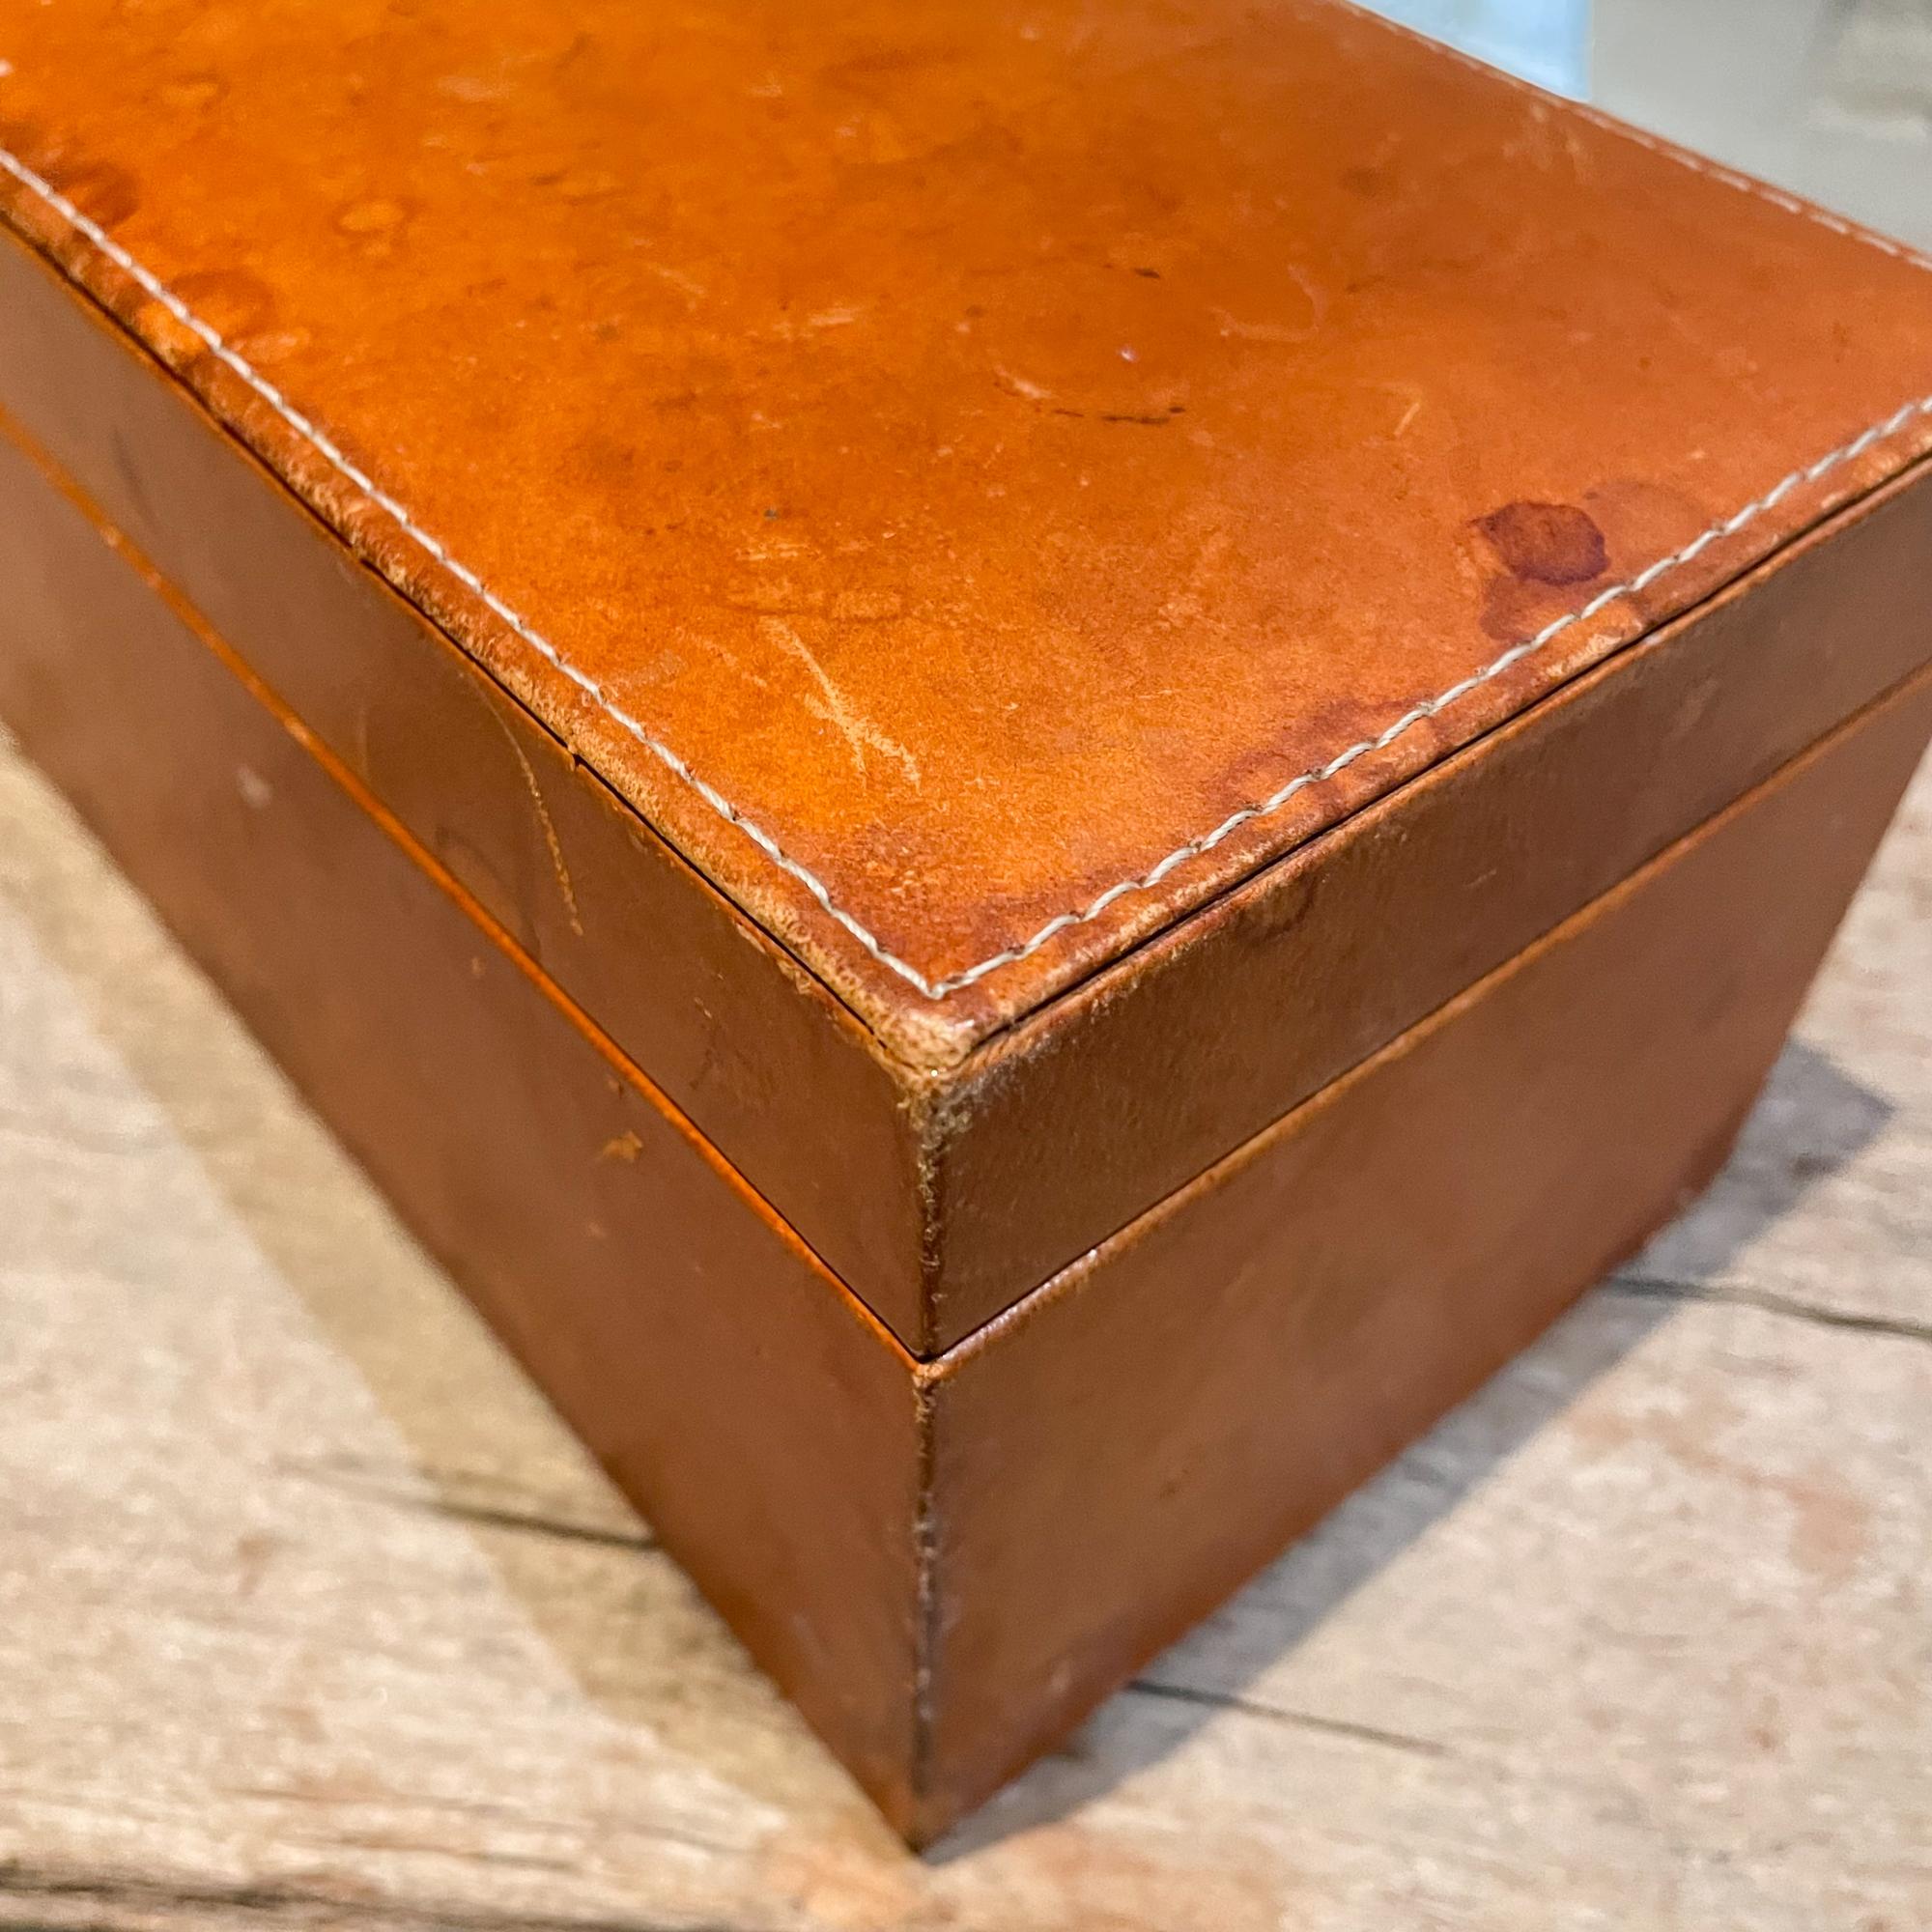 Mexican Distressed Cognac Leather Wrapped Sectioned Box Piel Canela Juarez Mexico City